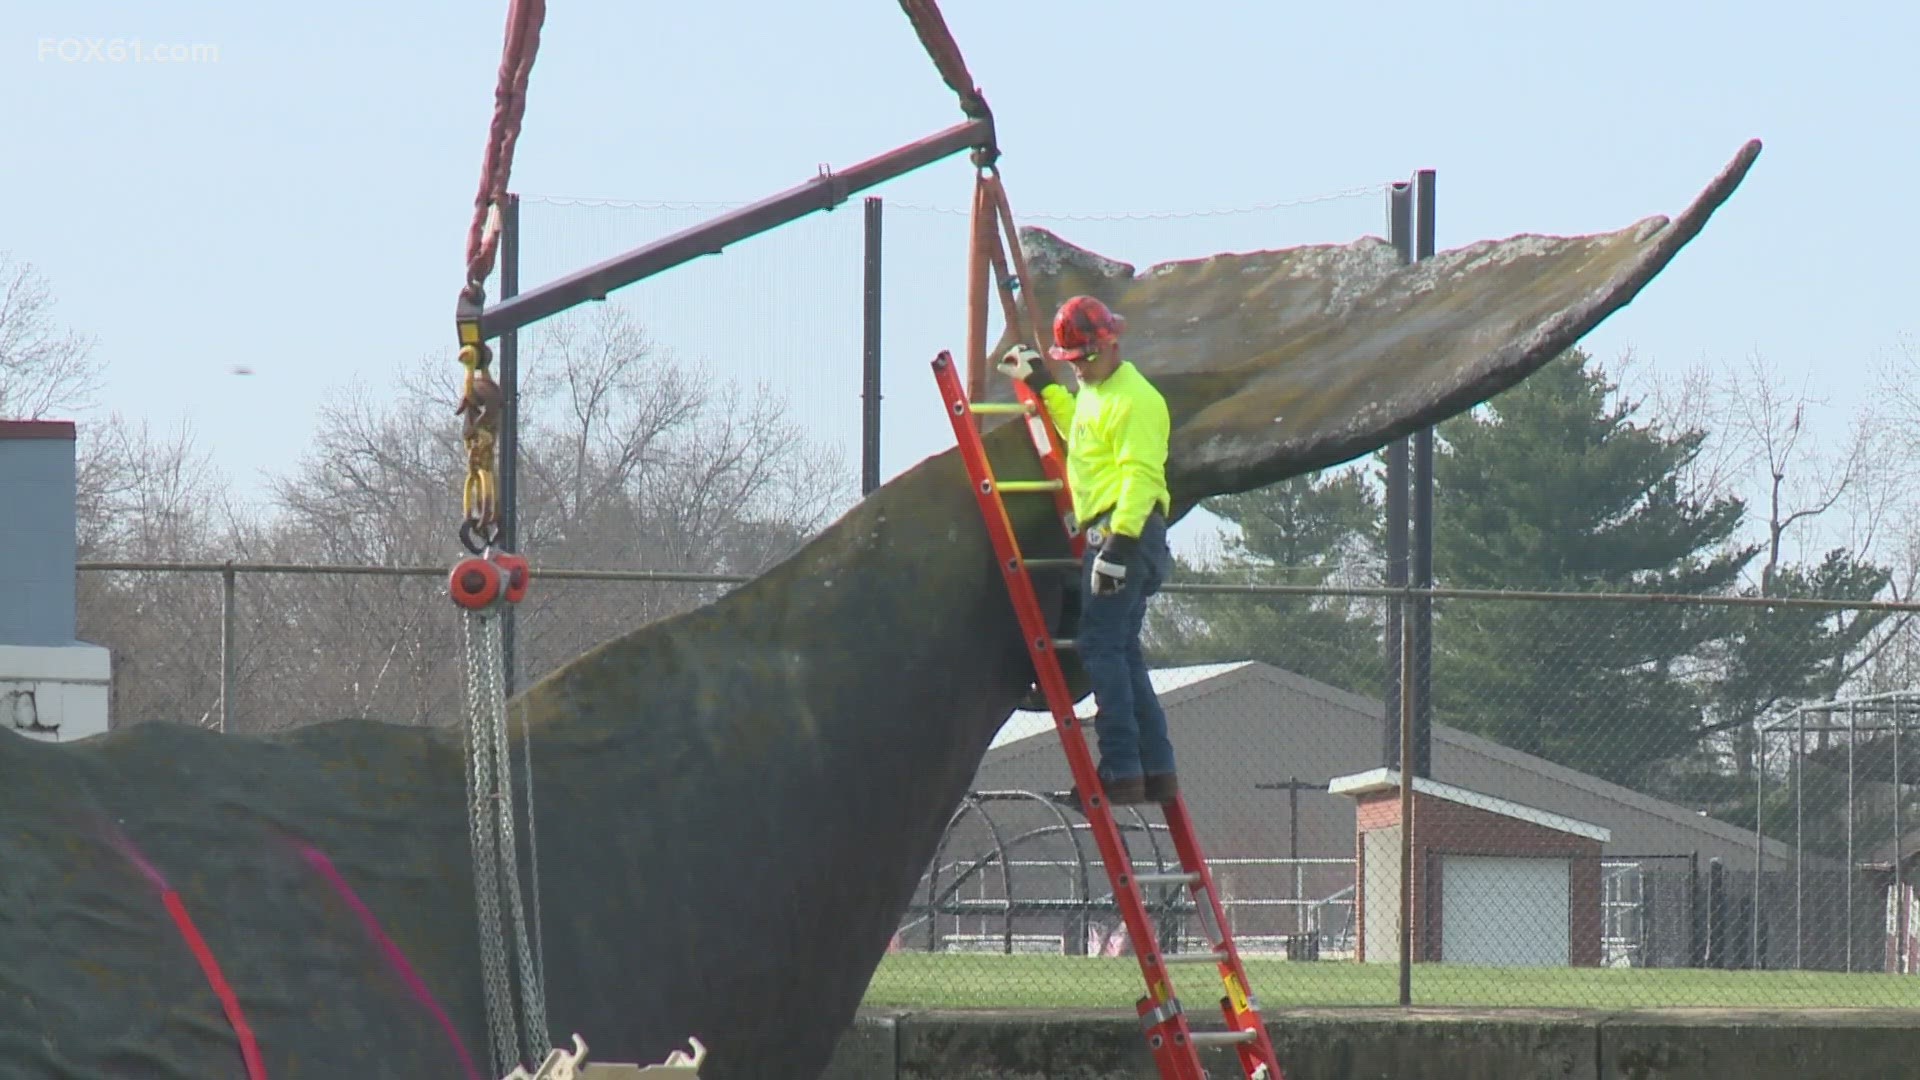 The concrete whale built 45 years ago will be moving from its spot after the Children's Museum recently relocated.